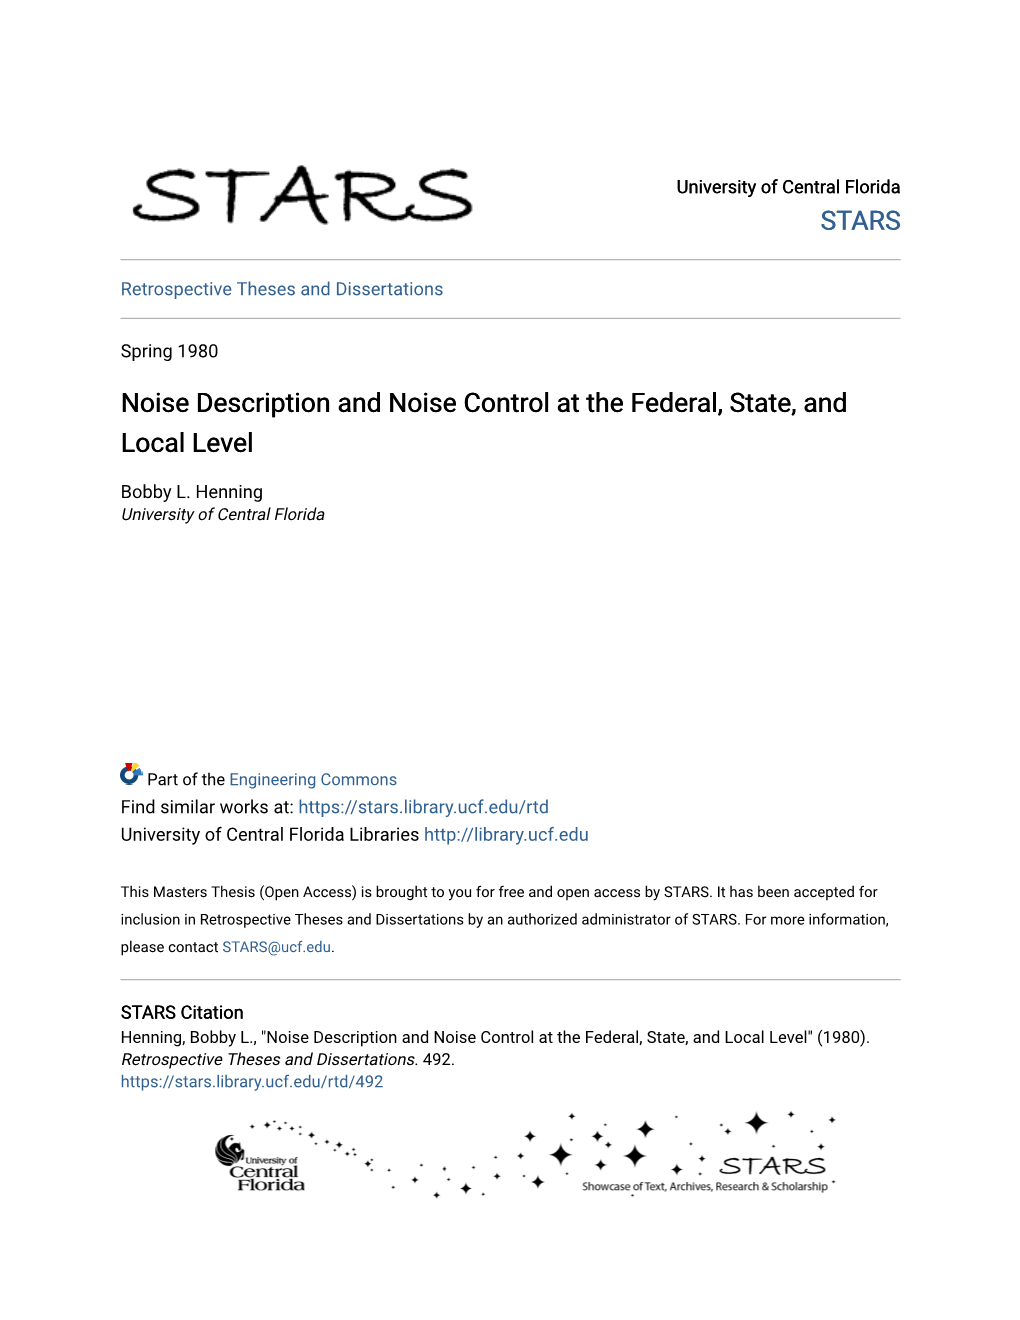 Noise Description and Noise Control at the Federal, State, and Local Level